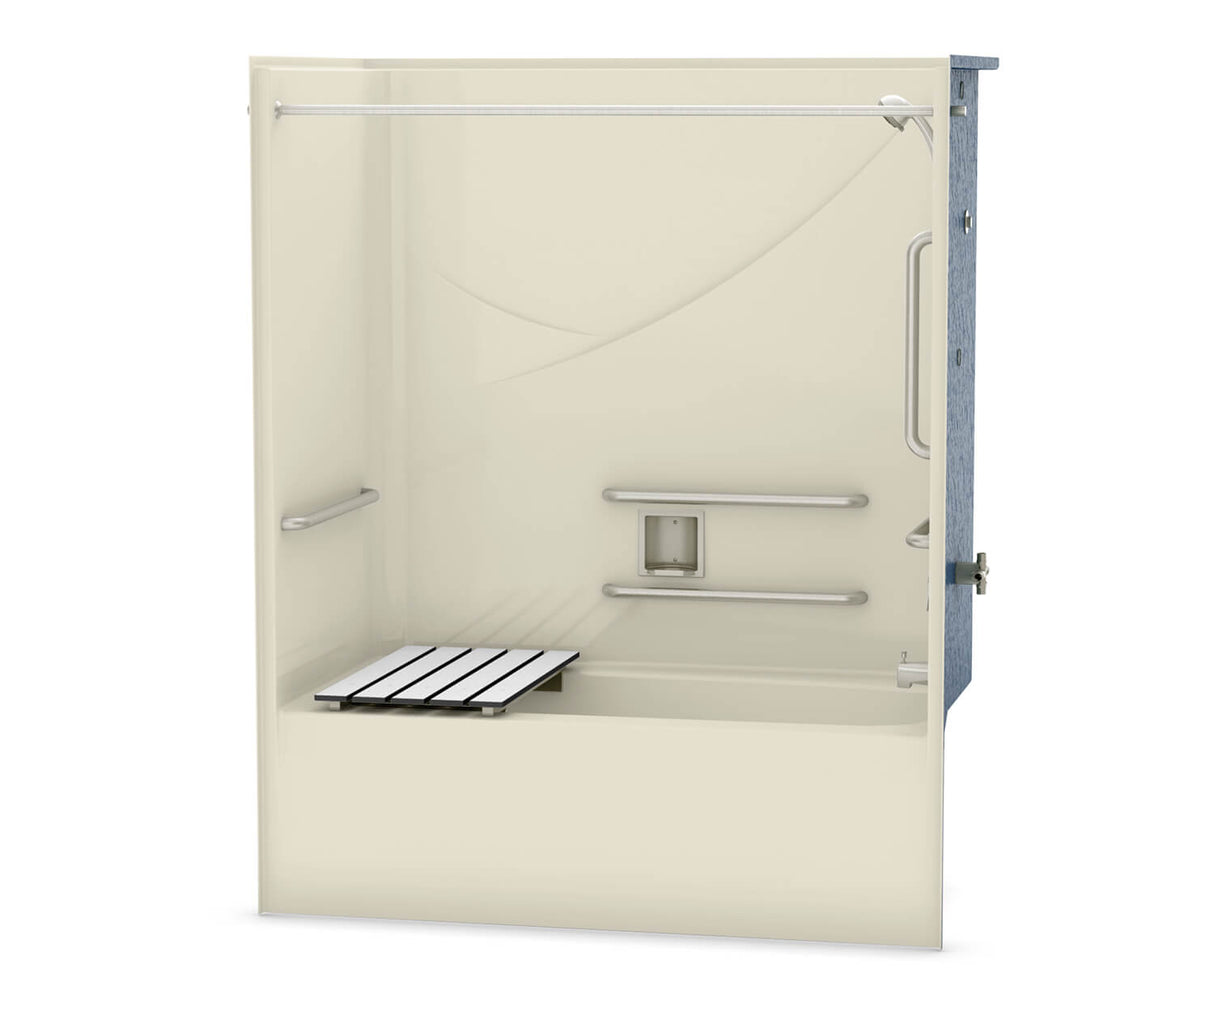 Aker OPTS-6032 AcrylX Alcove Right-Hand Drain One-Piece Tub Shower in Bone - ANSI Compliant